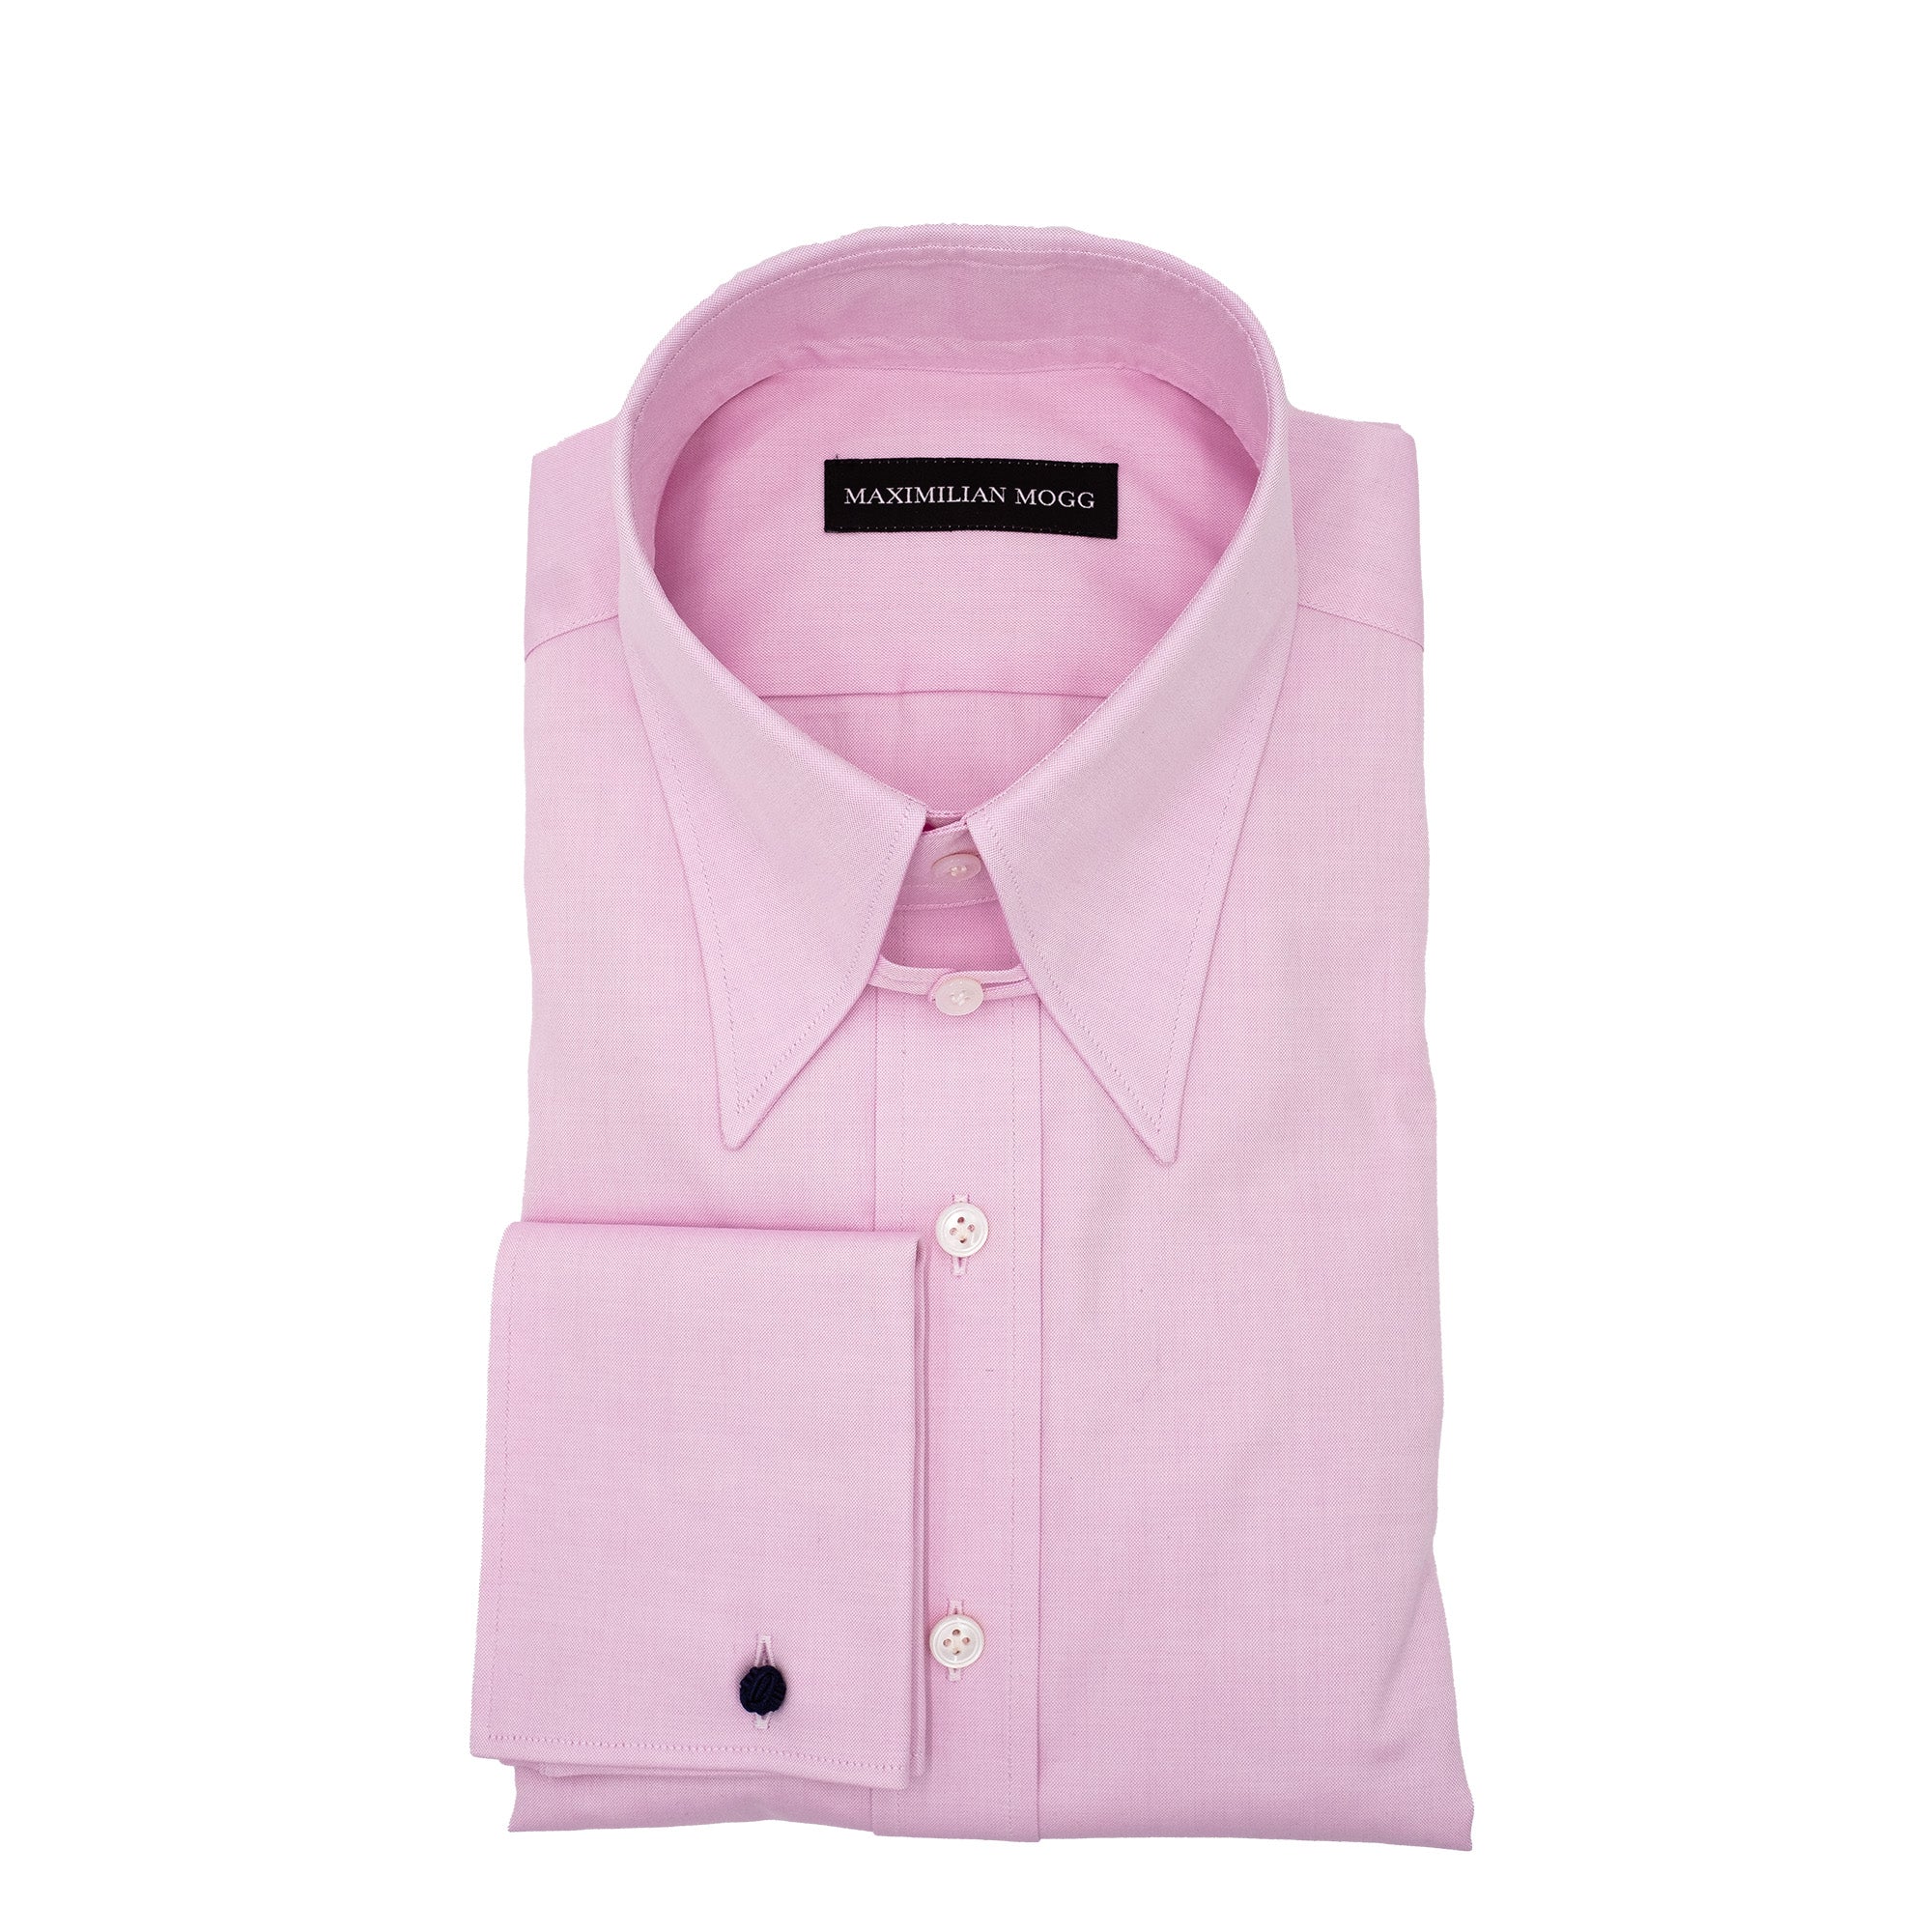 Shirt - Pink Pinpoint Spearpoint-Tab